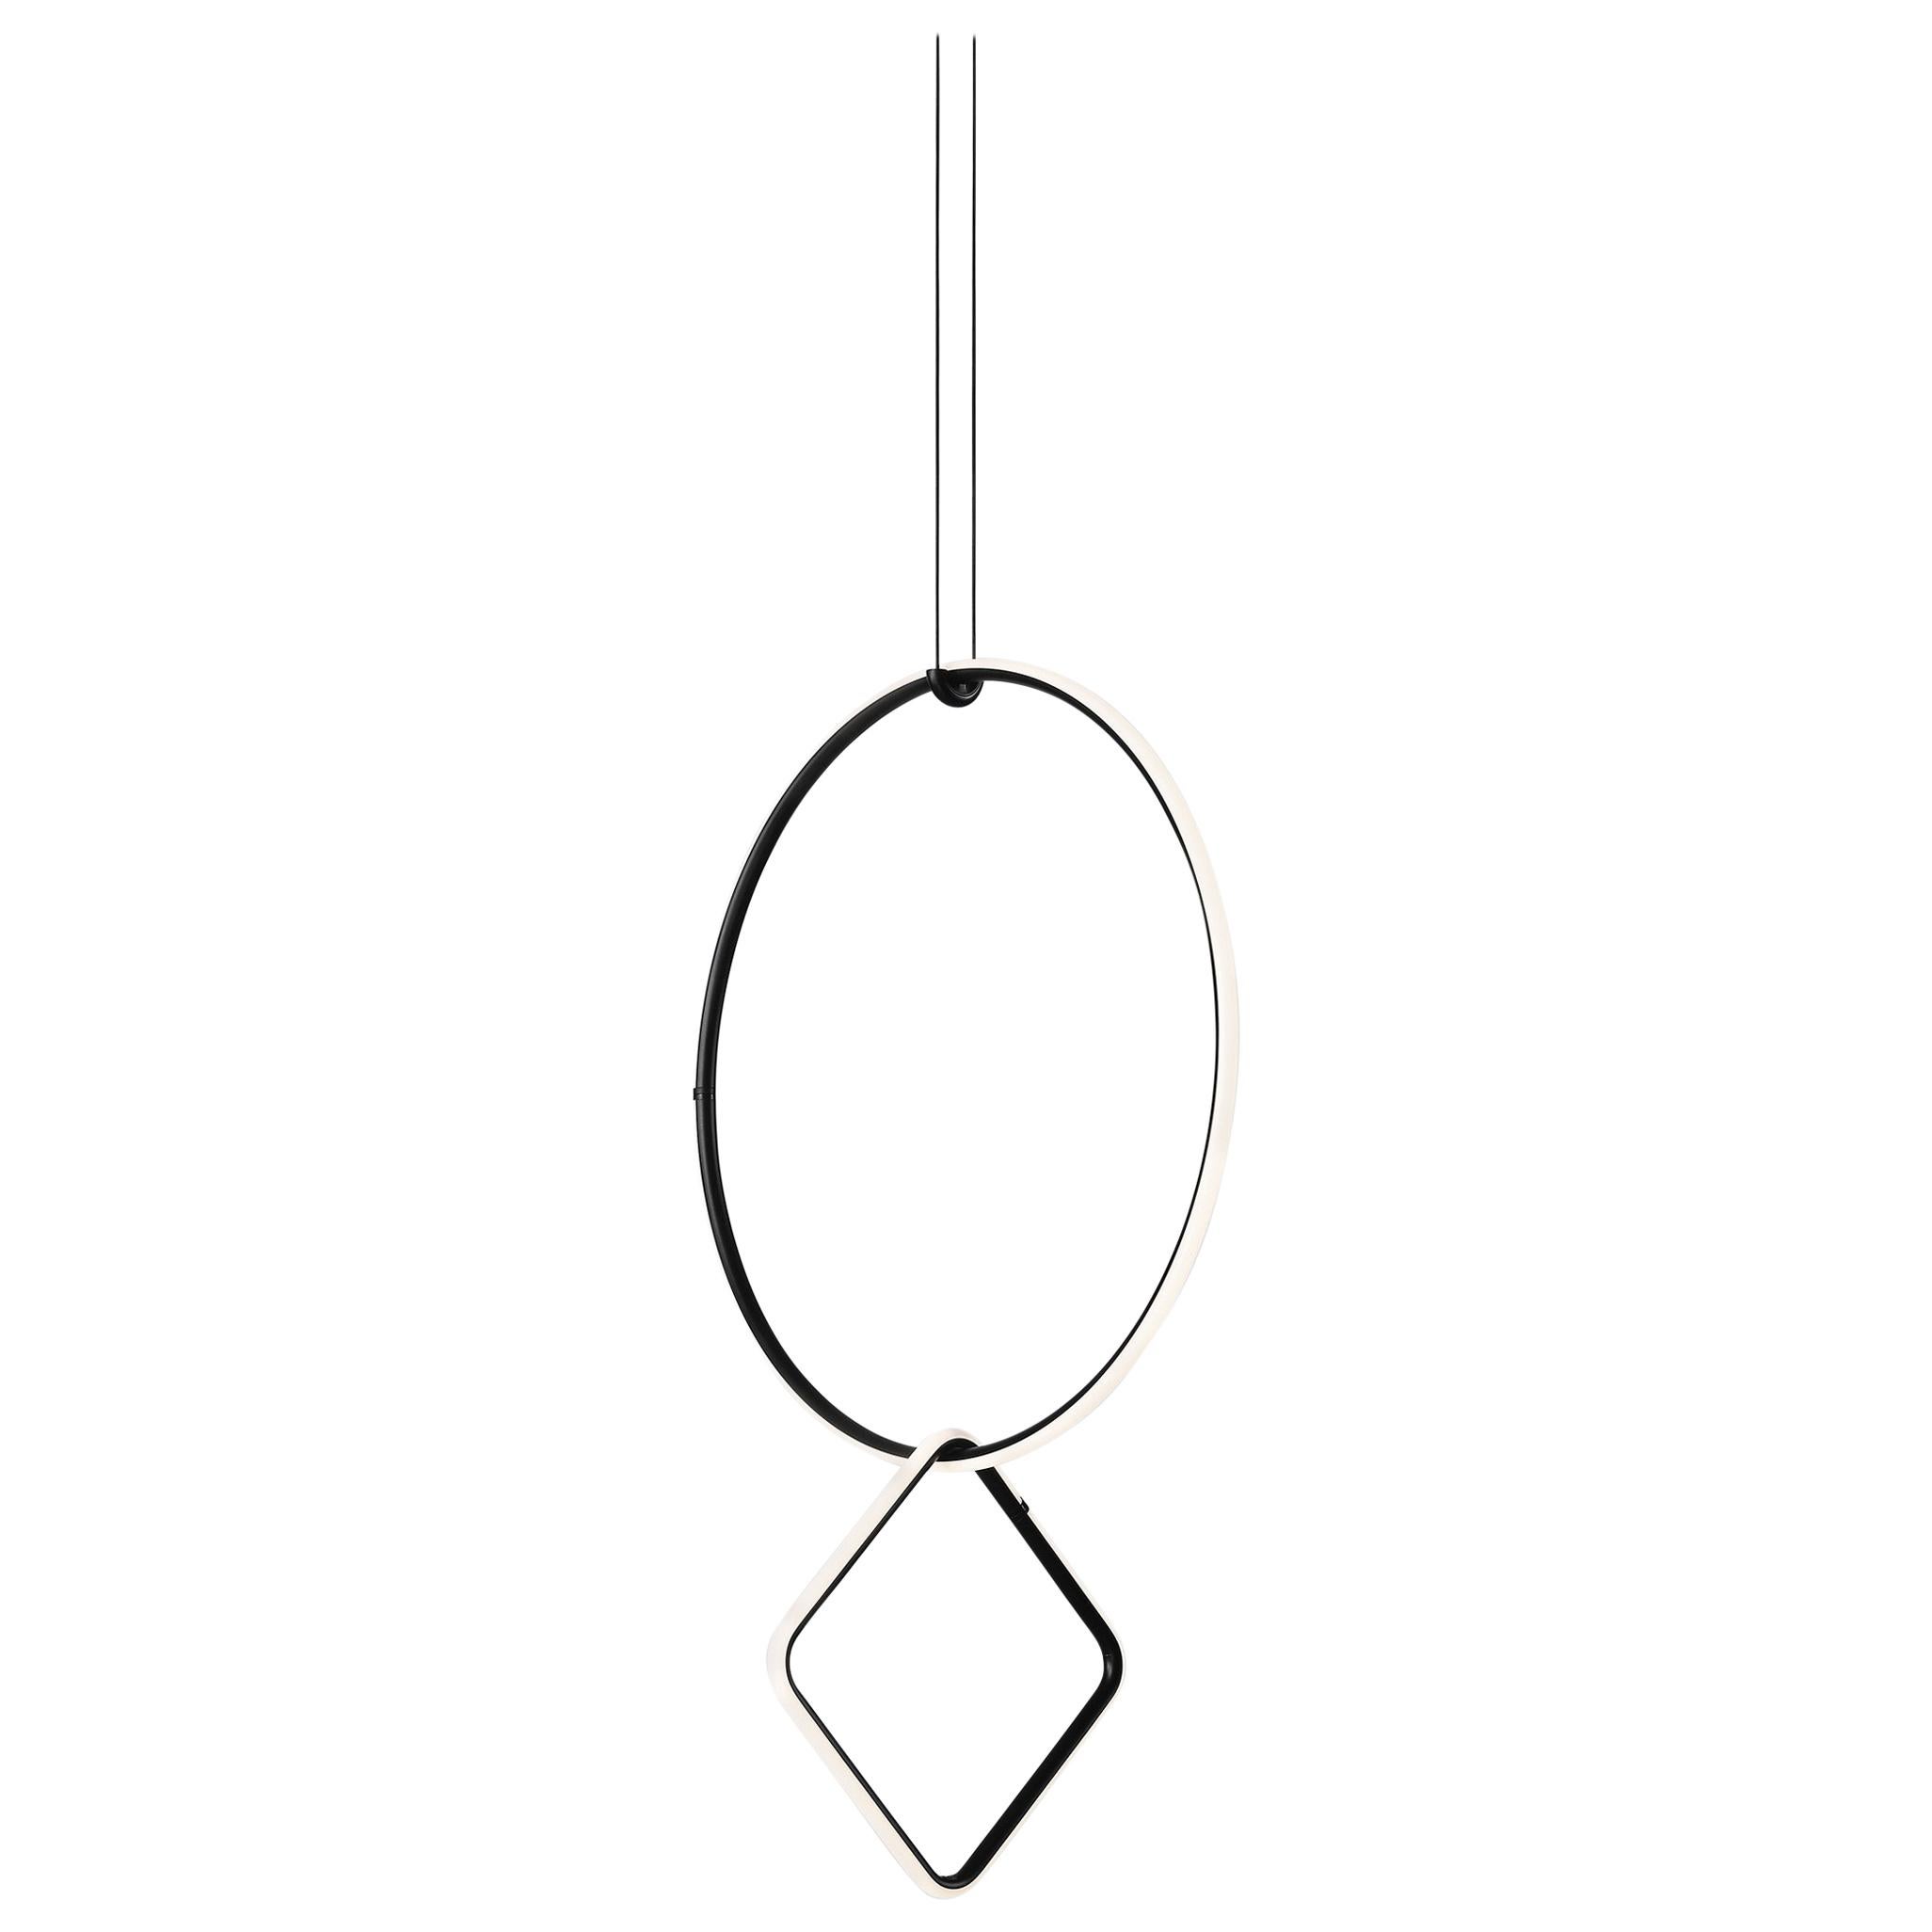 FLOS Medium Circle and Small Square Arrangements Light by Michael Anastassiades For Sale